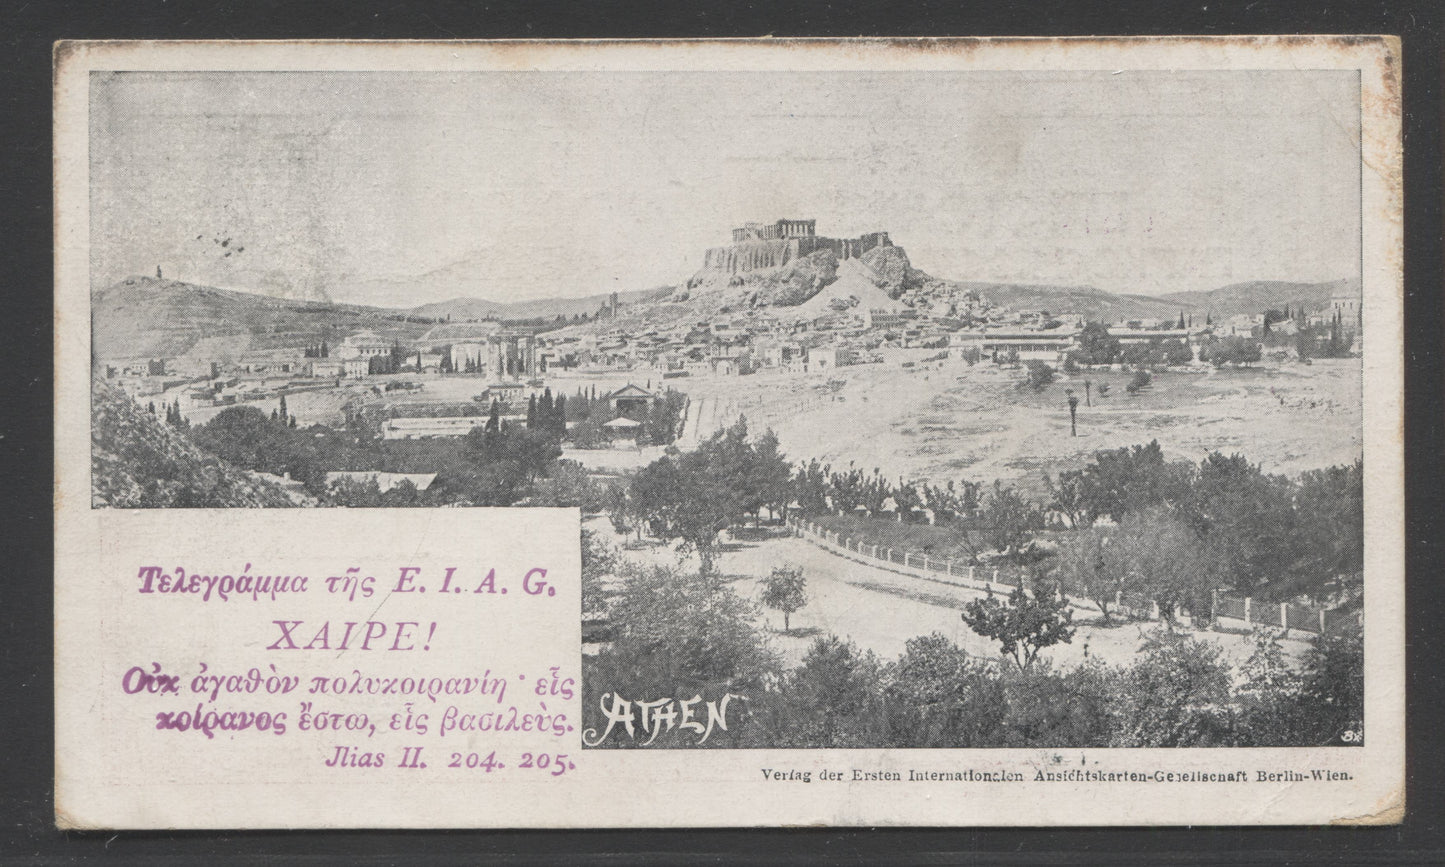 Lot 235 Greece, 10l Yellow 1889-1895 Athens Printing On A Postcard From 1898 Showing the Parthenon